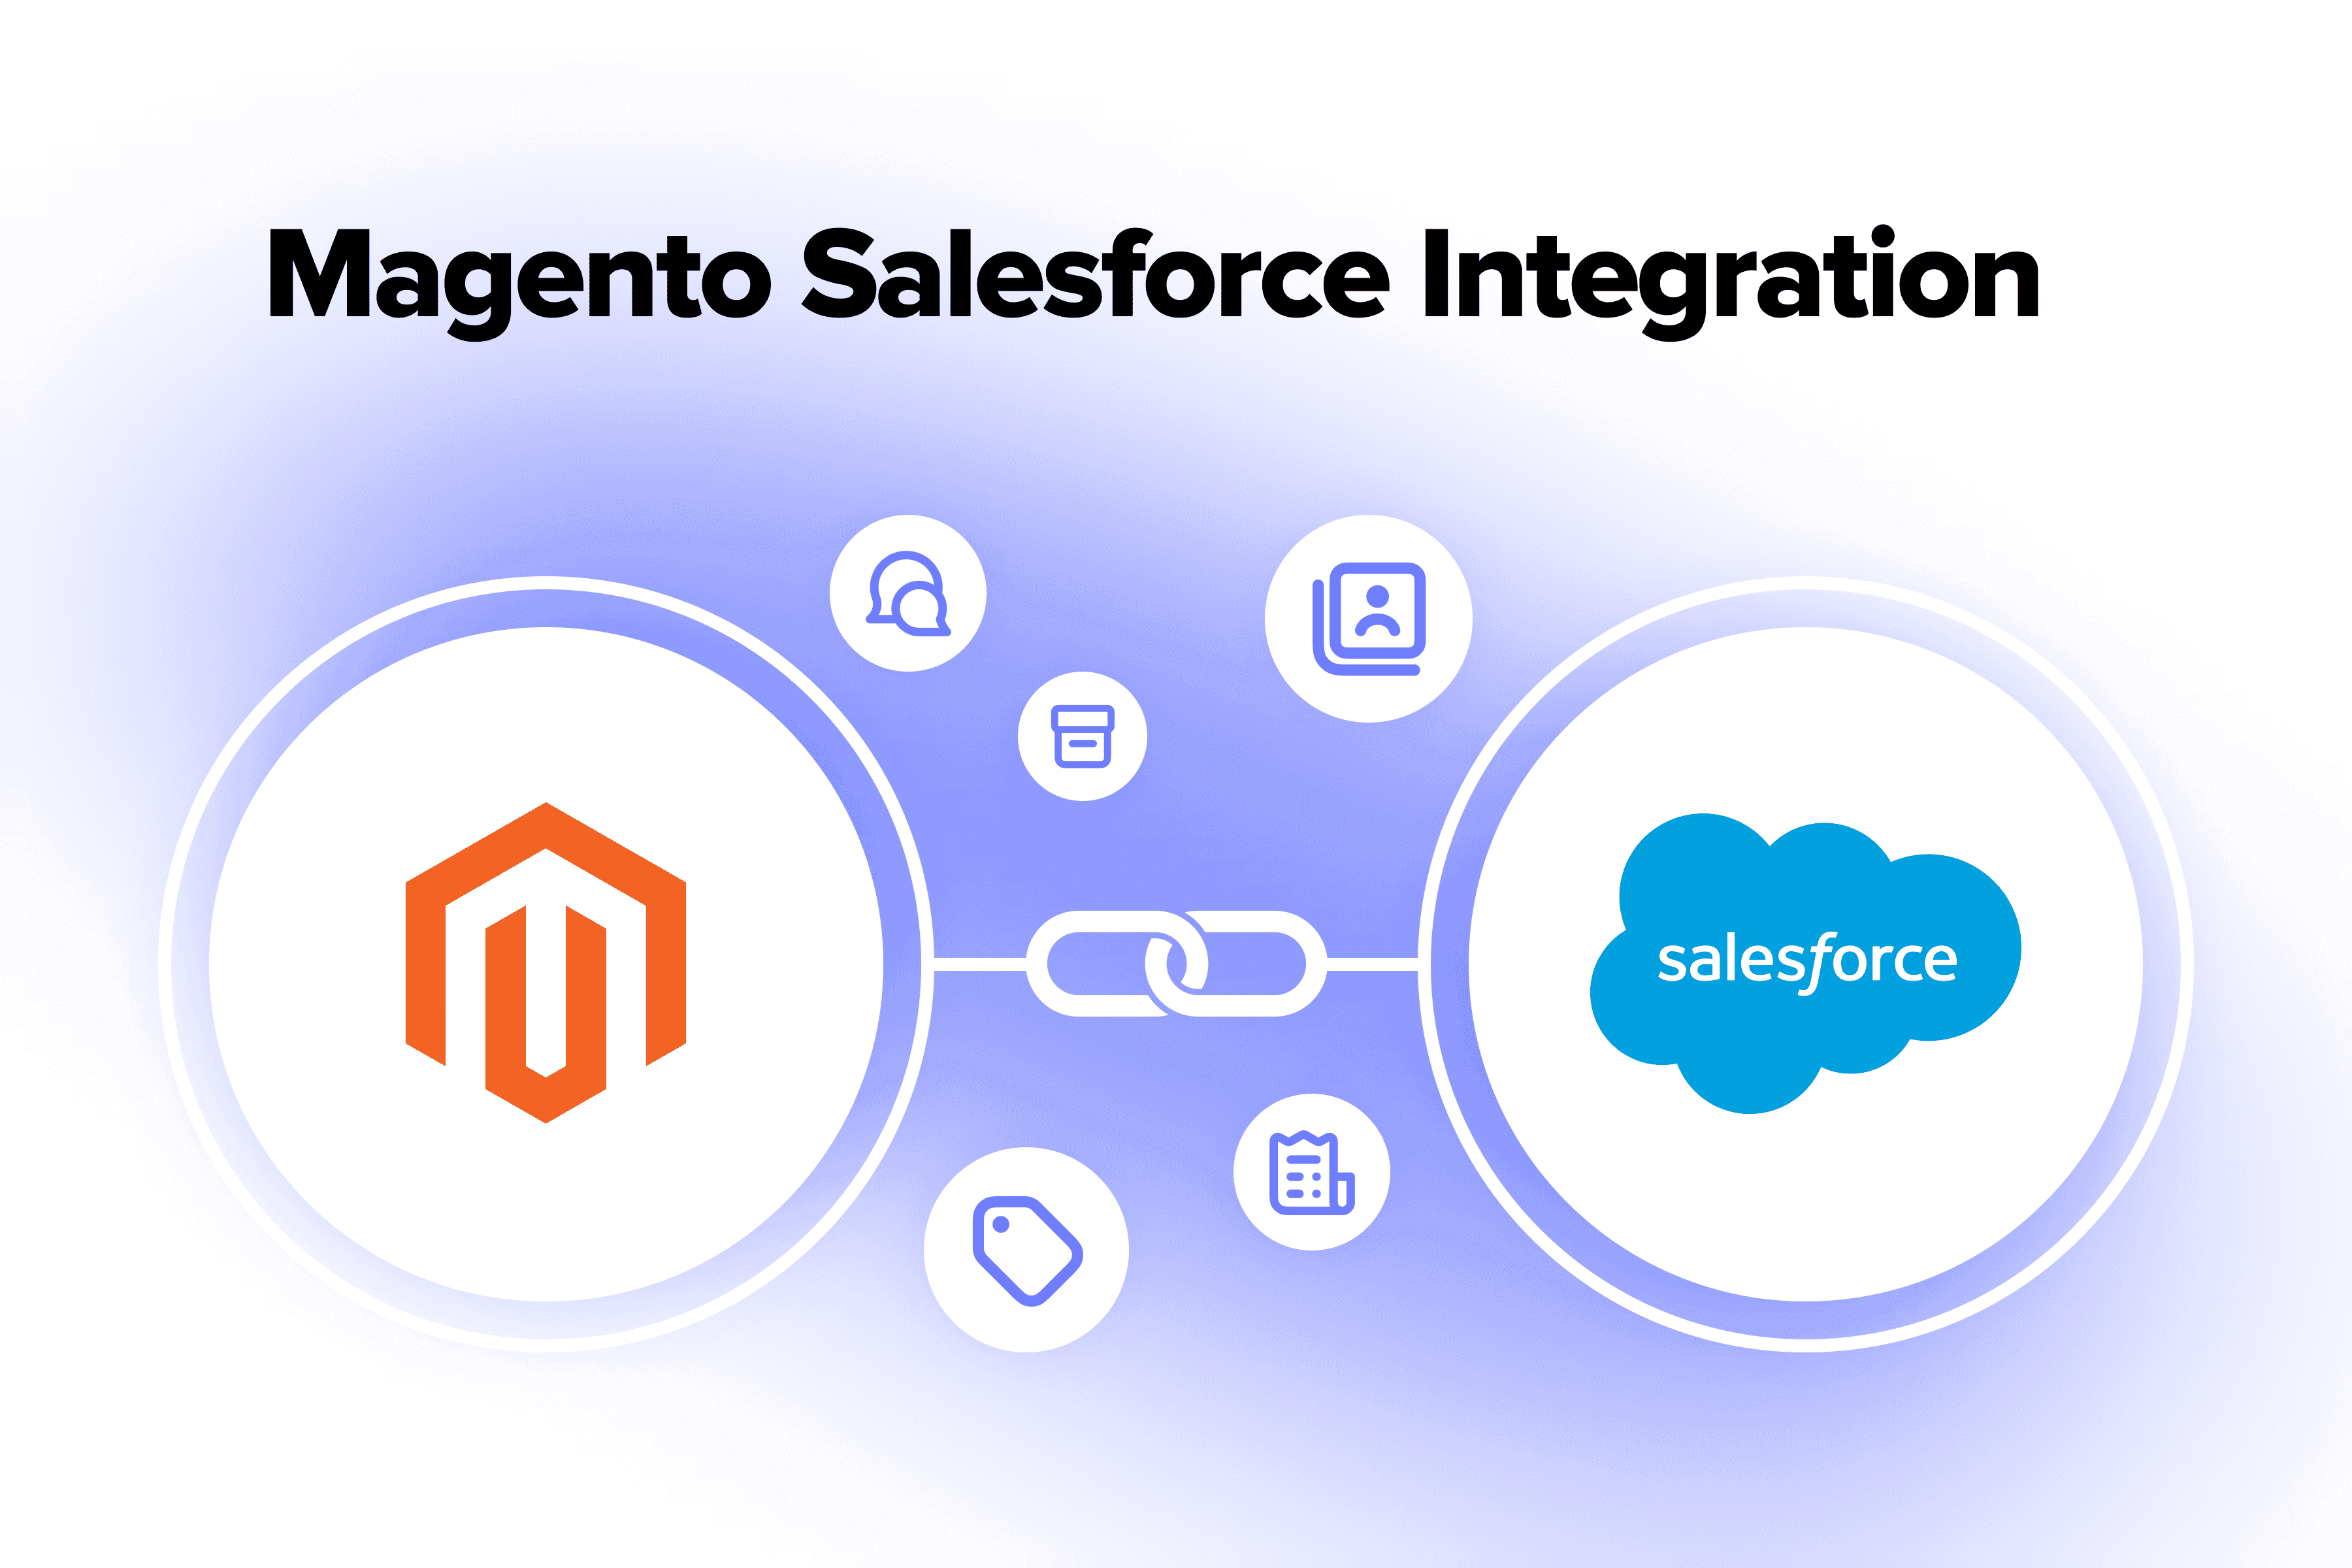 Magento Salesforce Integration – Top Use Cases